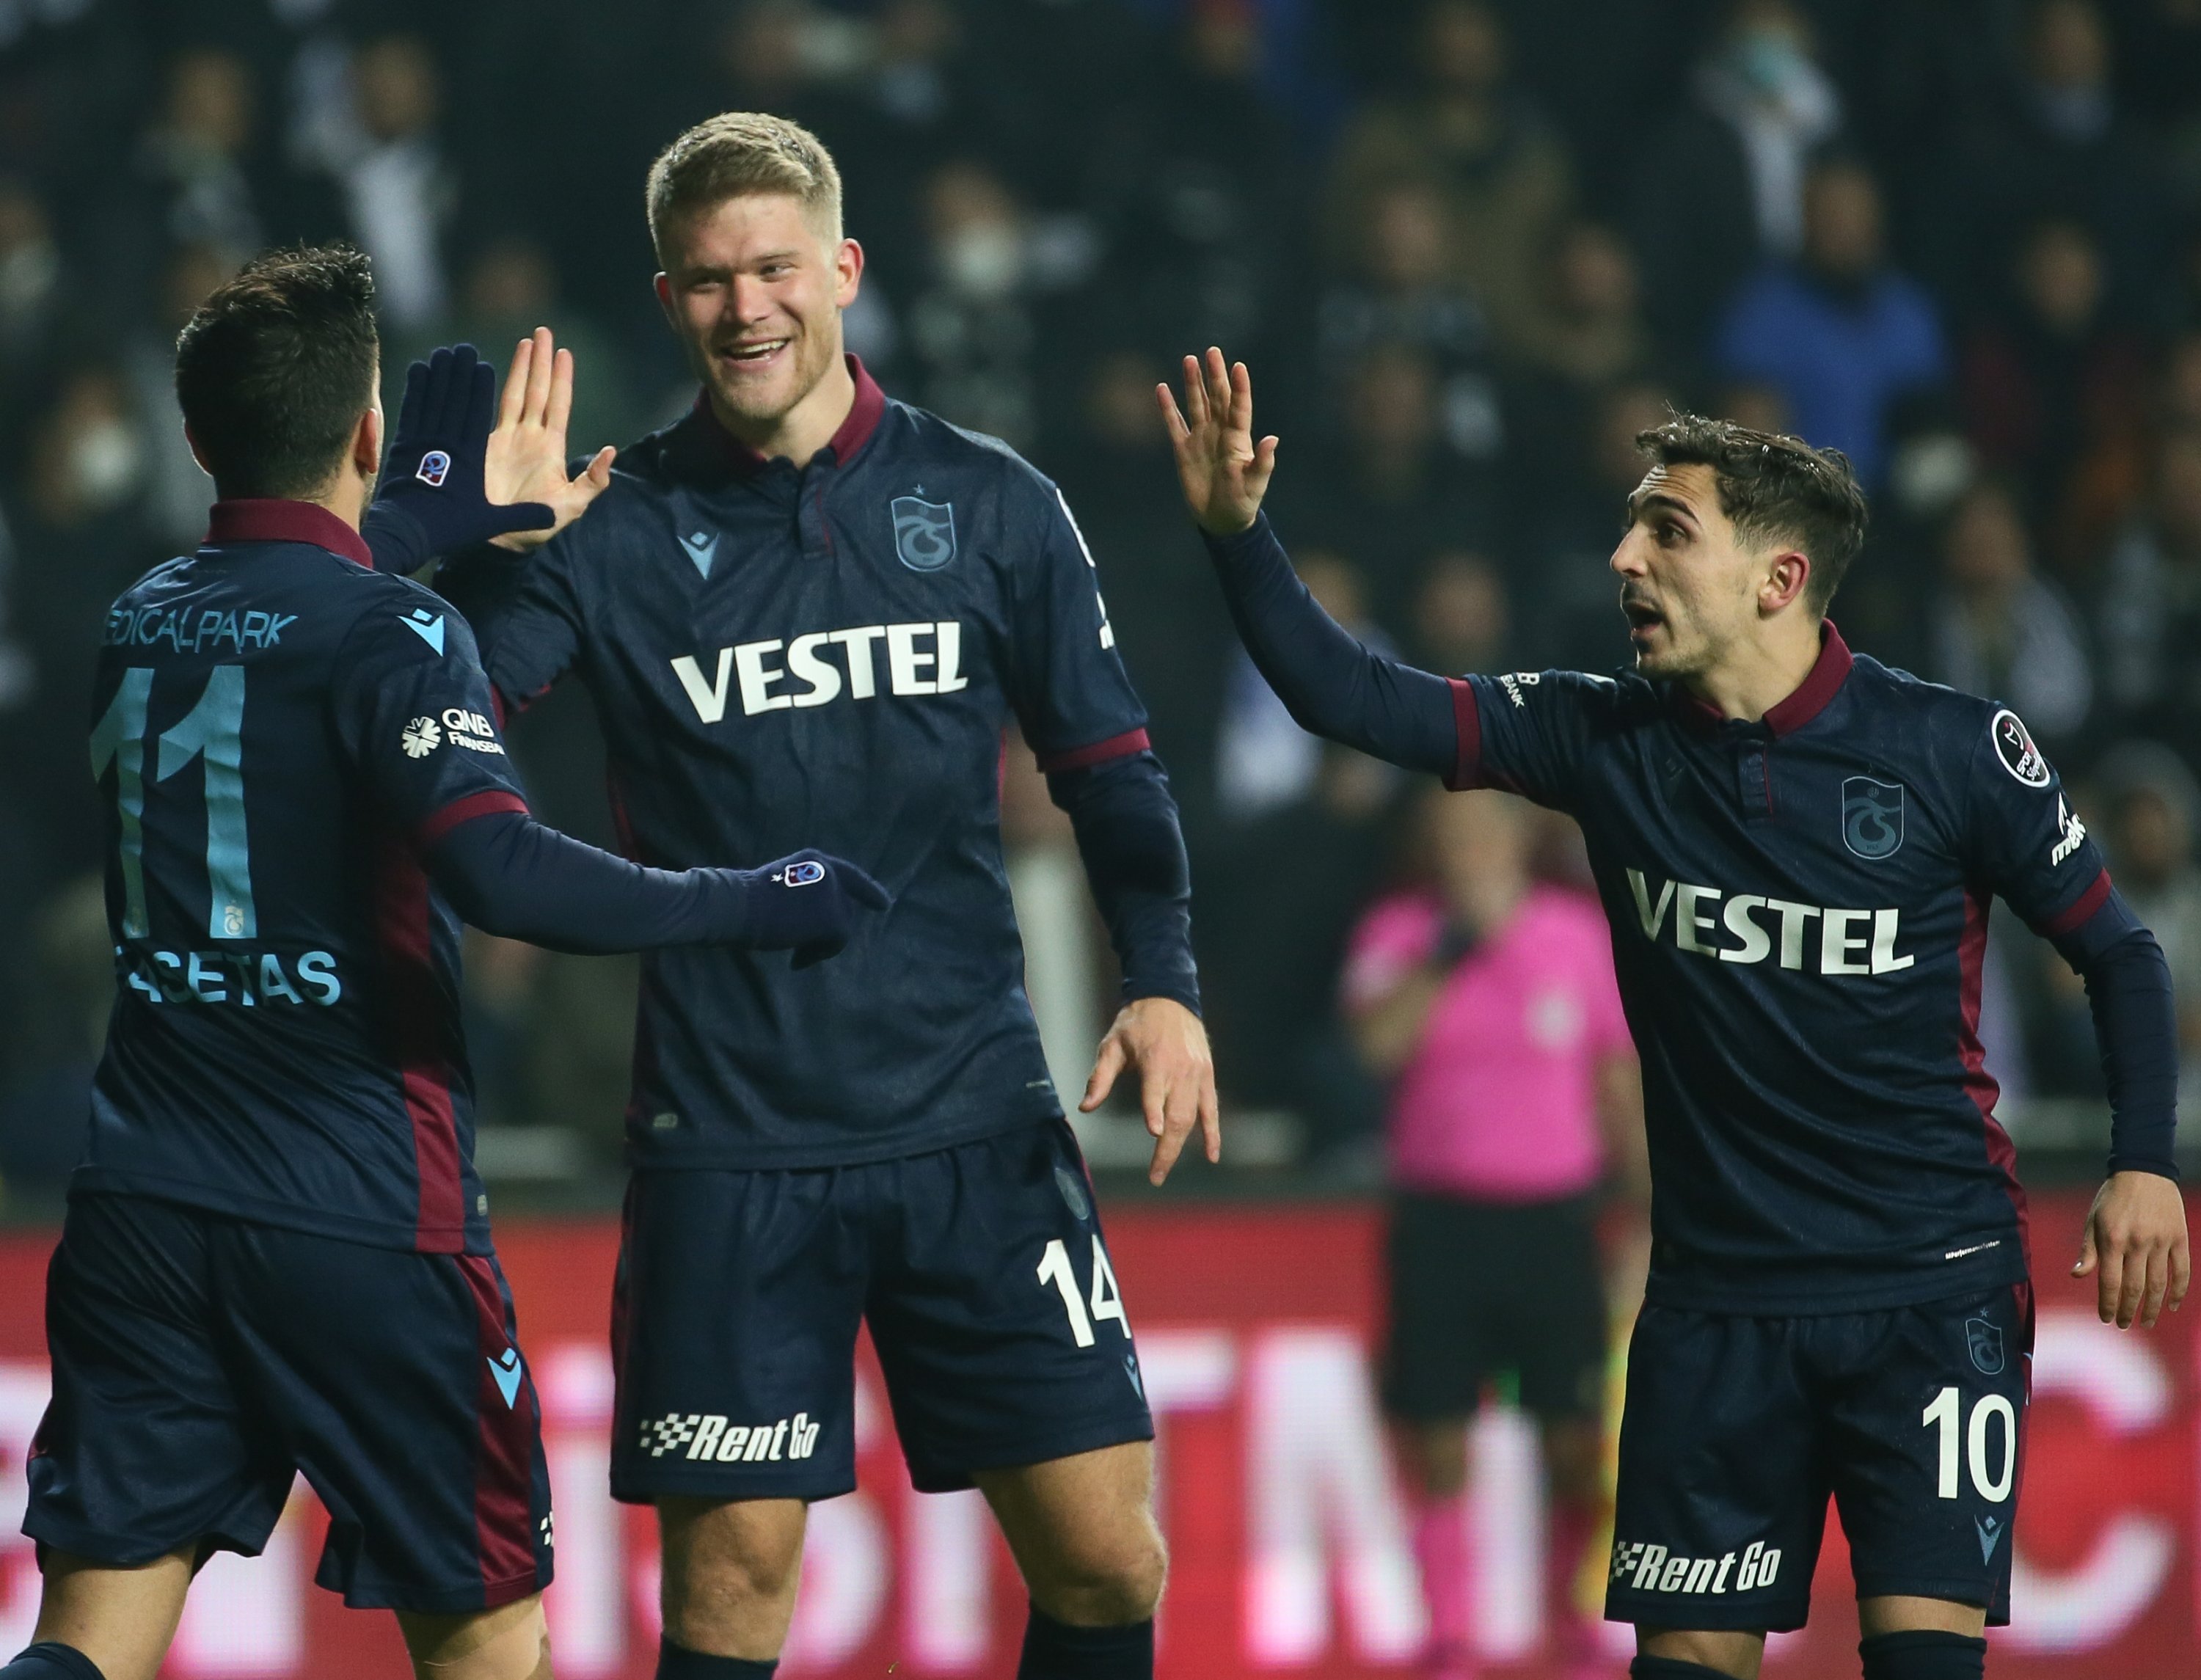 Trabzonspor’s Andreas Cornelius (C) celebrates with teammates after scoring a goal in a Süper Lig game against Altay, Izmir, Turkey, Dec. 21, 2021. (AA Photo)